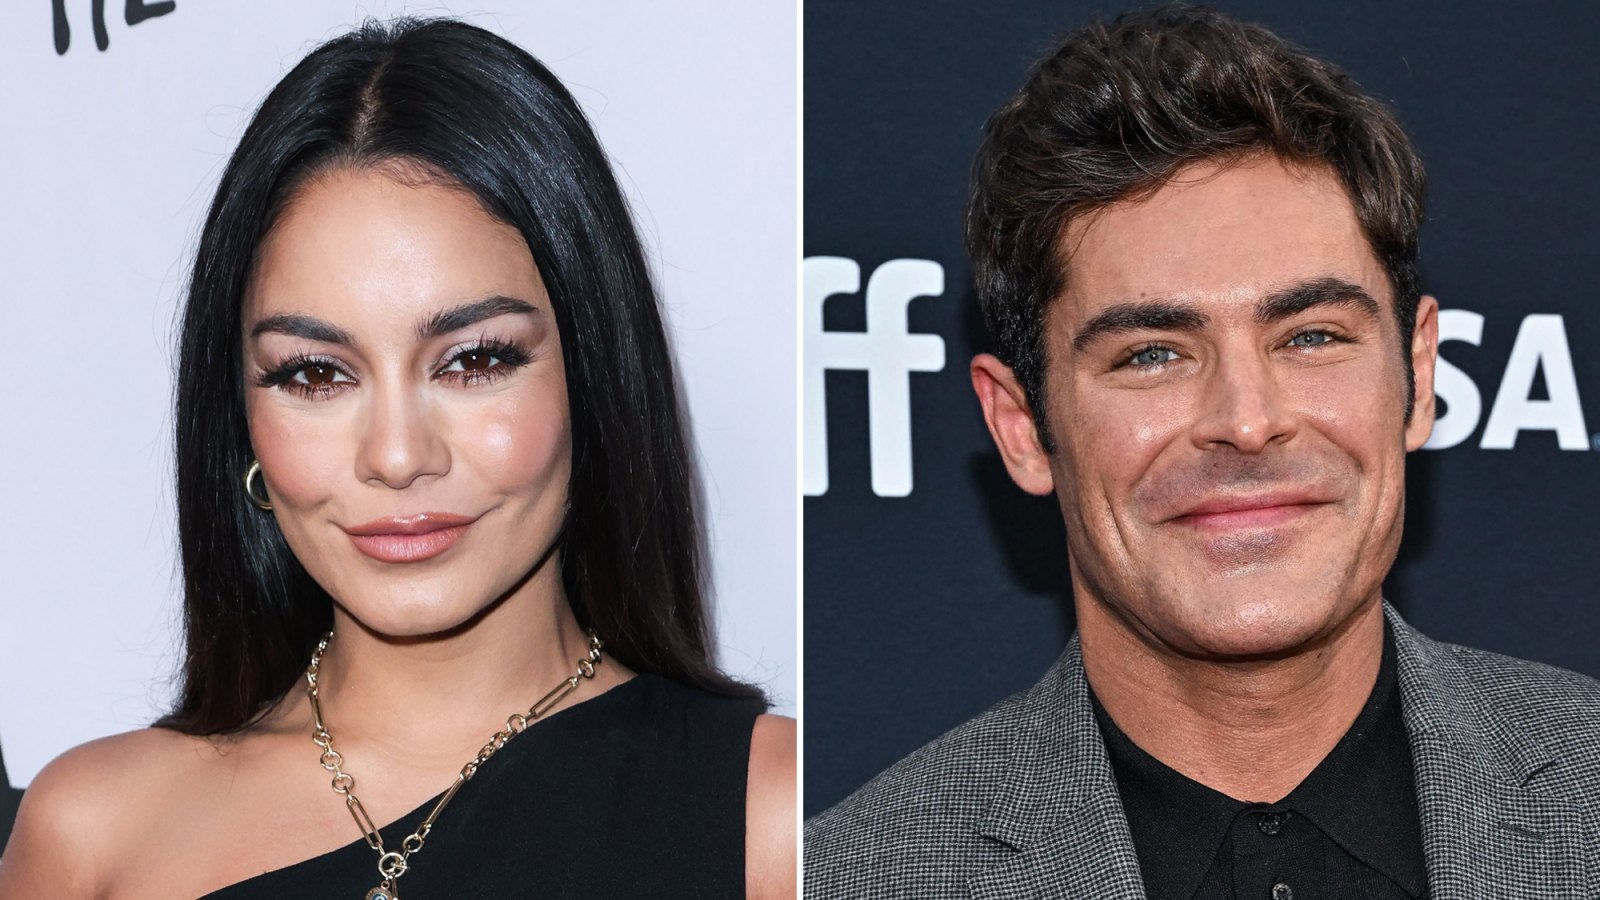 Vanessa Hudgens Reveals How Her East High Visit Came to Be — And Reacts to Ex Zac Efron's Similar Photo